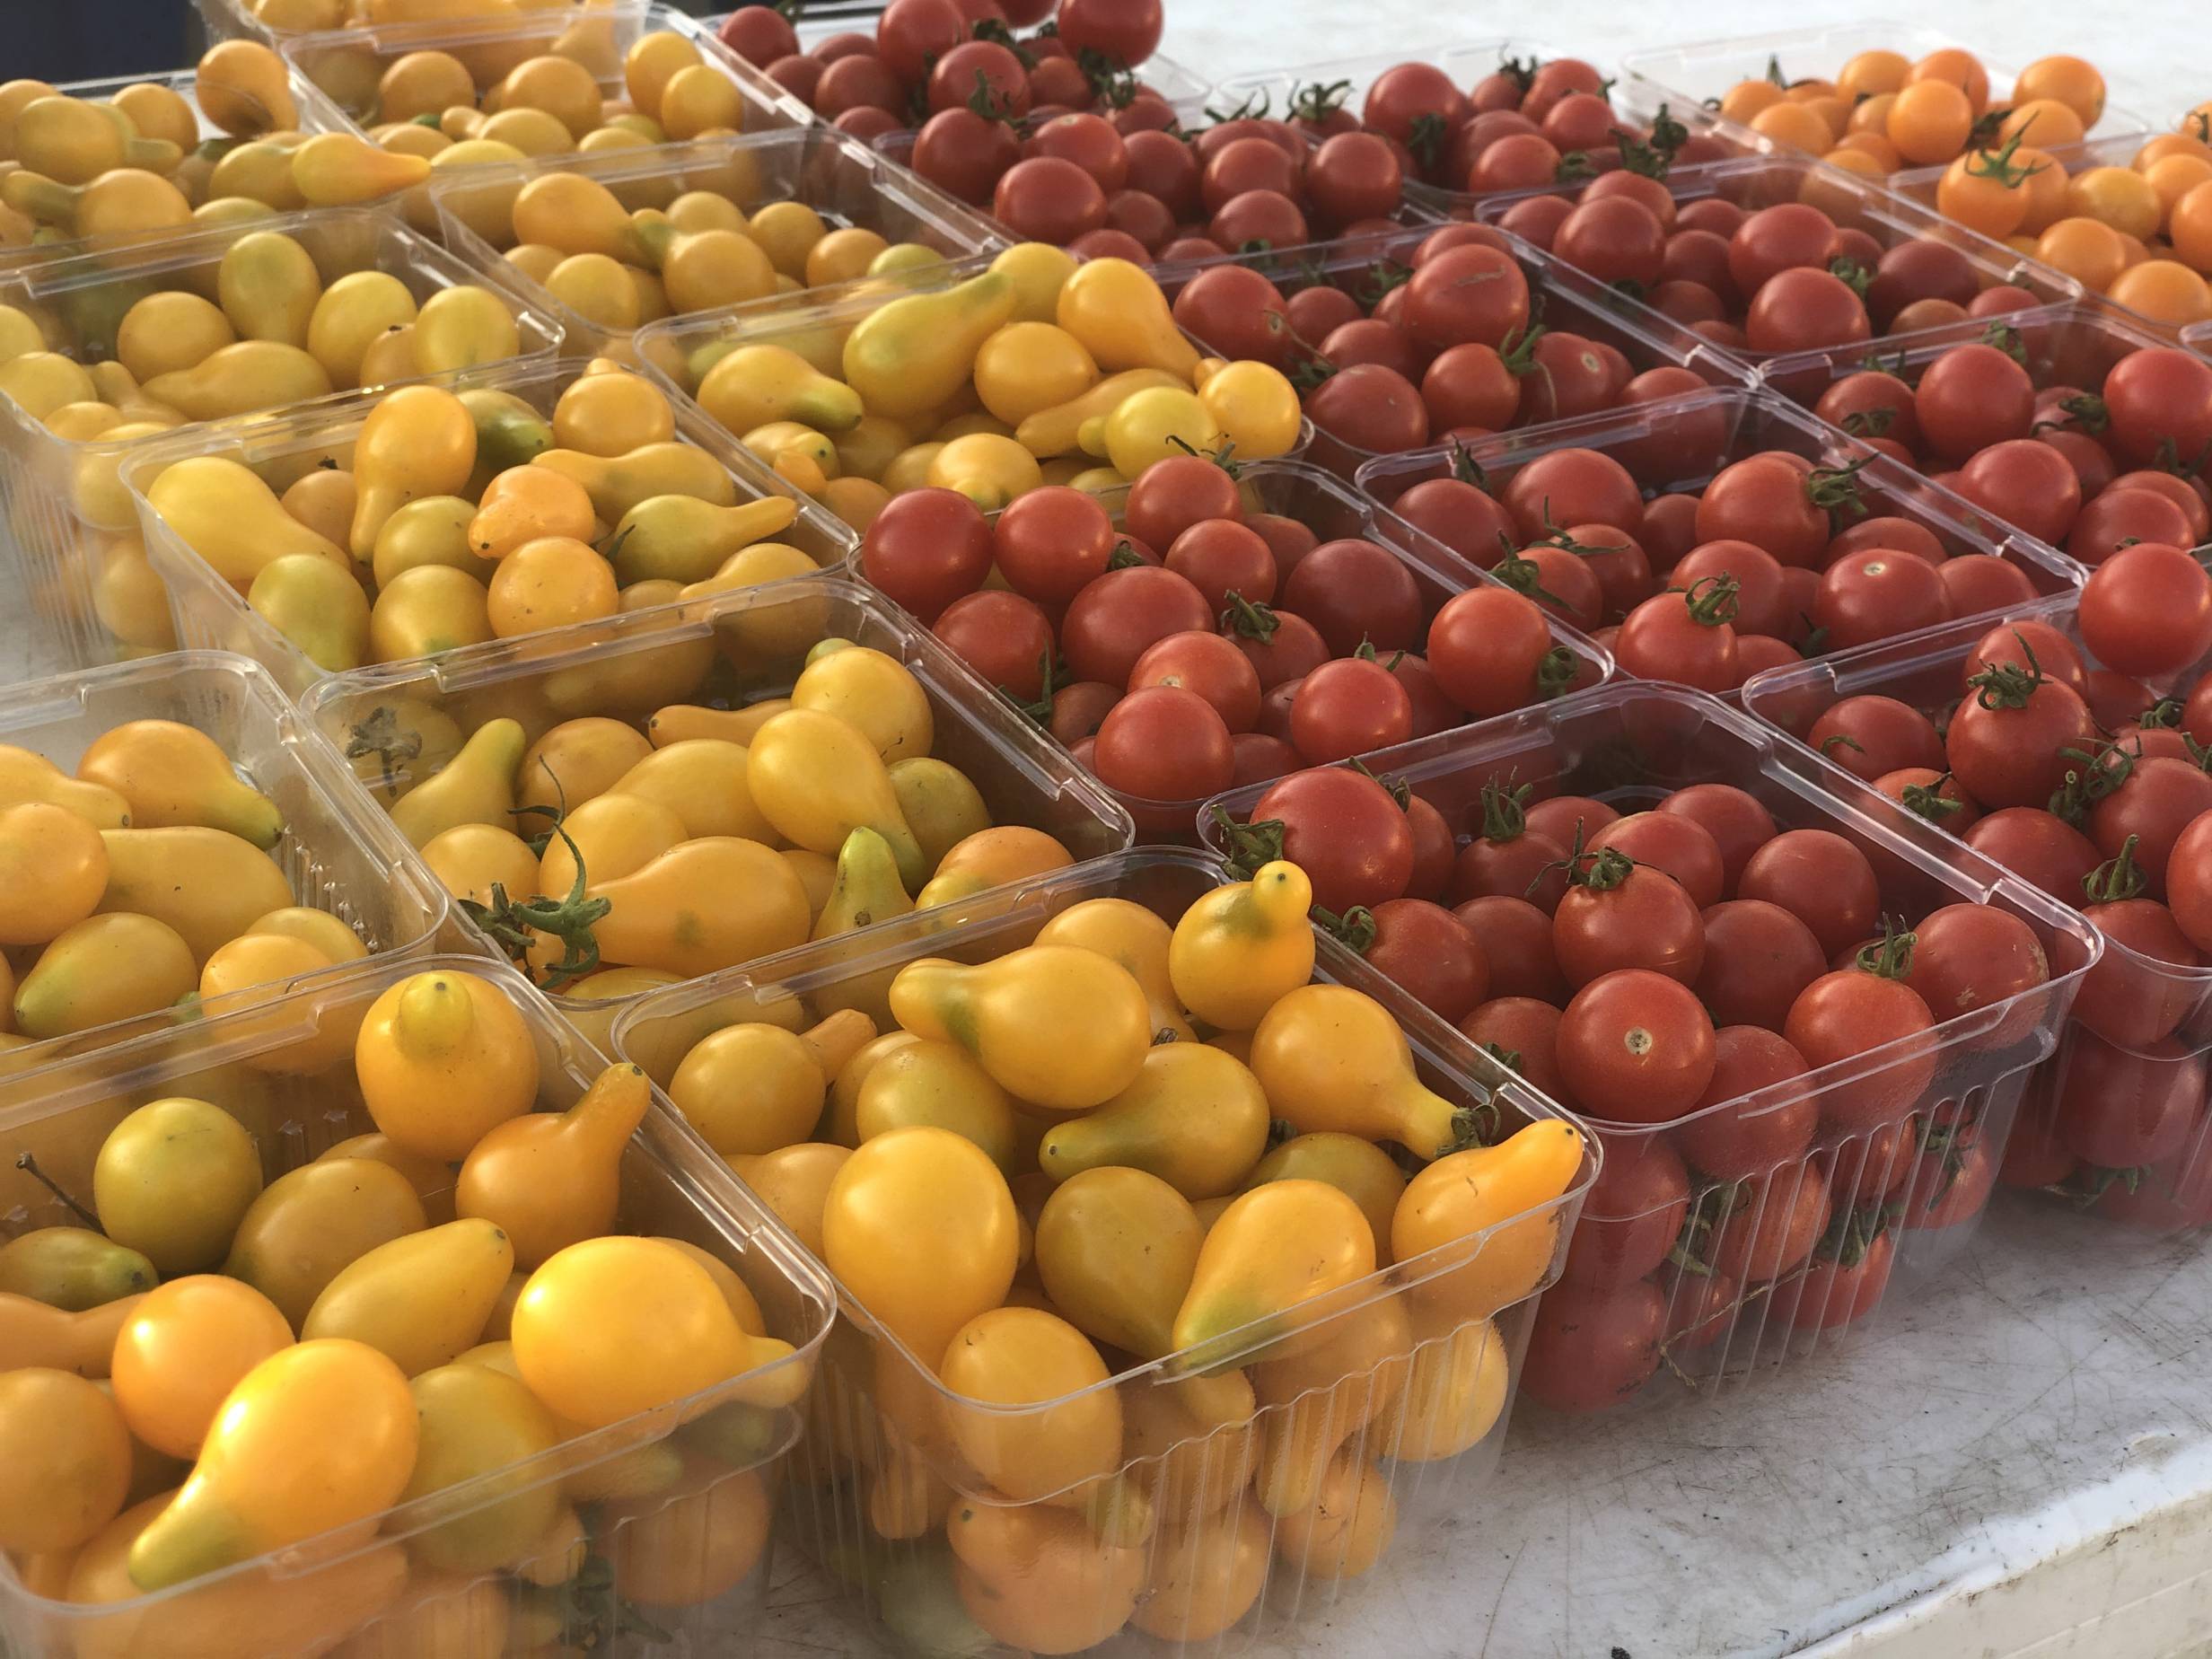 Many small, clear plastic containers hold very small yellow, red, and orange tomatoes, separated into containers by color. Photo by Alyssa Buckley.